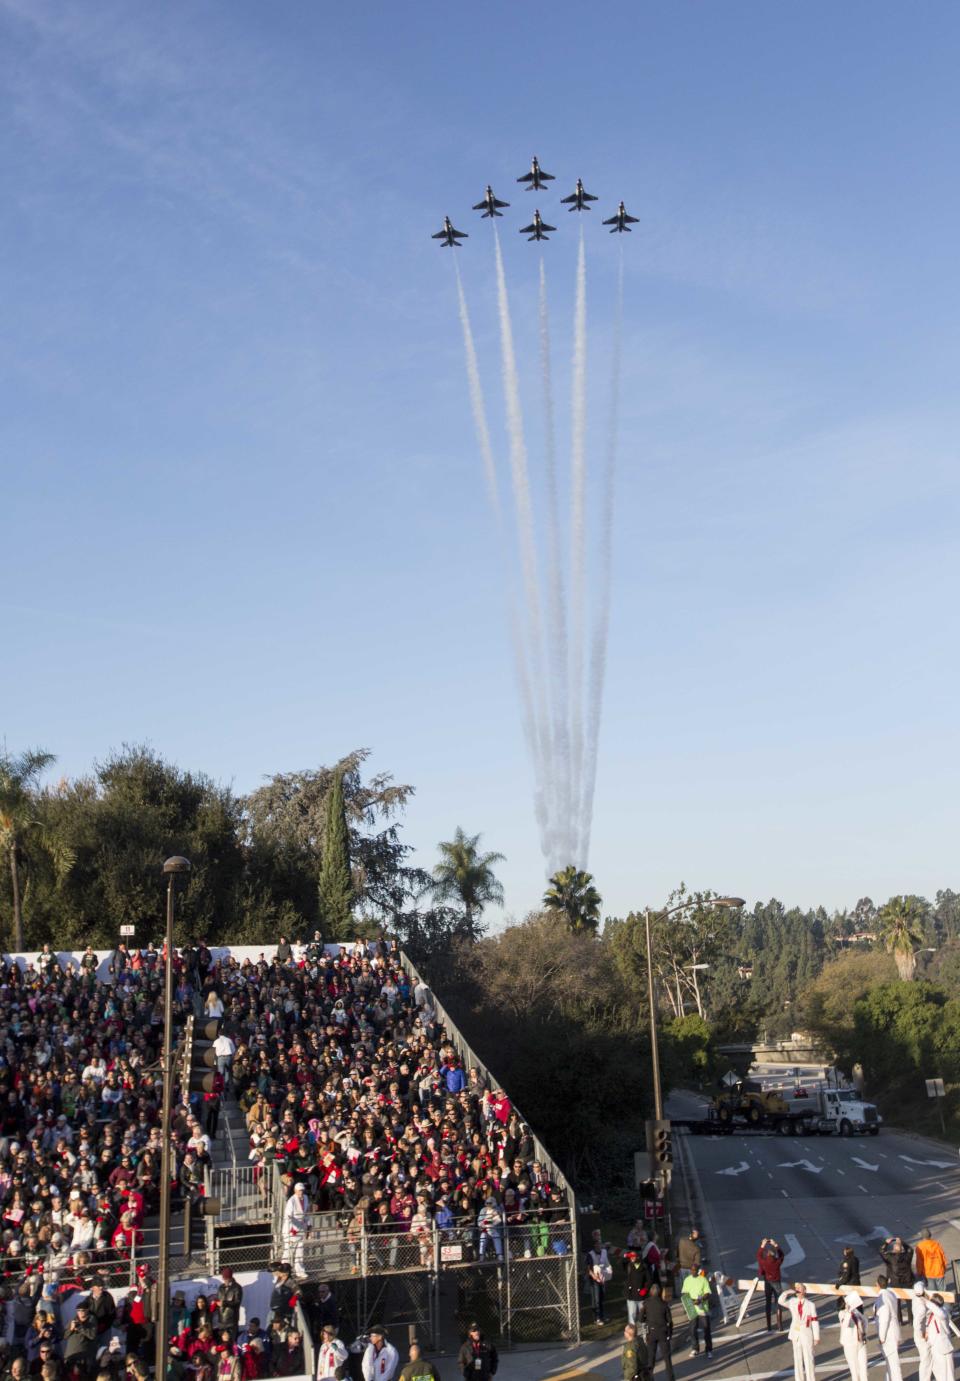 The United States Air Force Thunderbirds perform a flyover before the 125th Tournament of Roses Parade in Pasadena, Calif., Wednesday, Jan. 1, 2014. (AP Photo/Ringo H.W. Chiu)